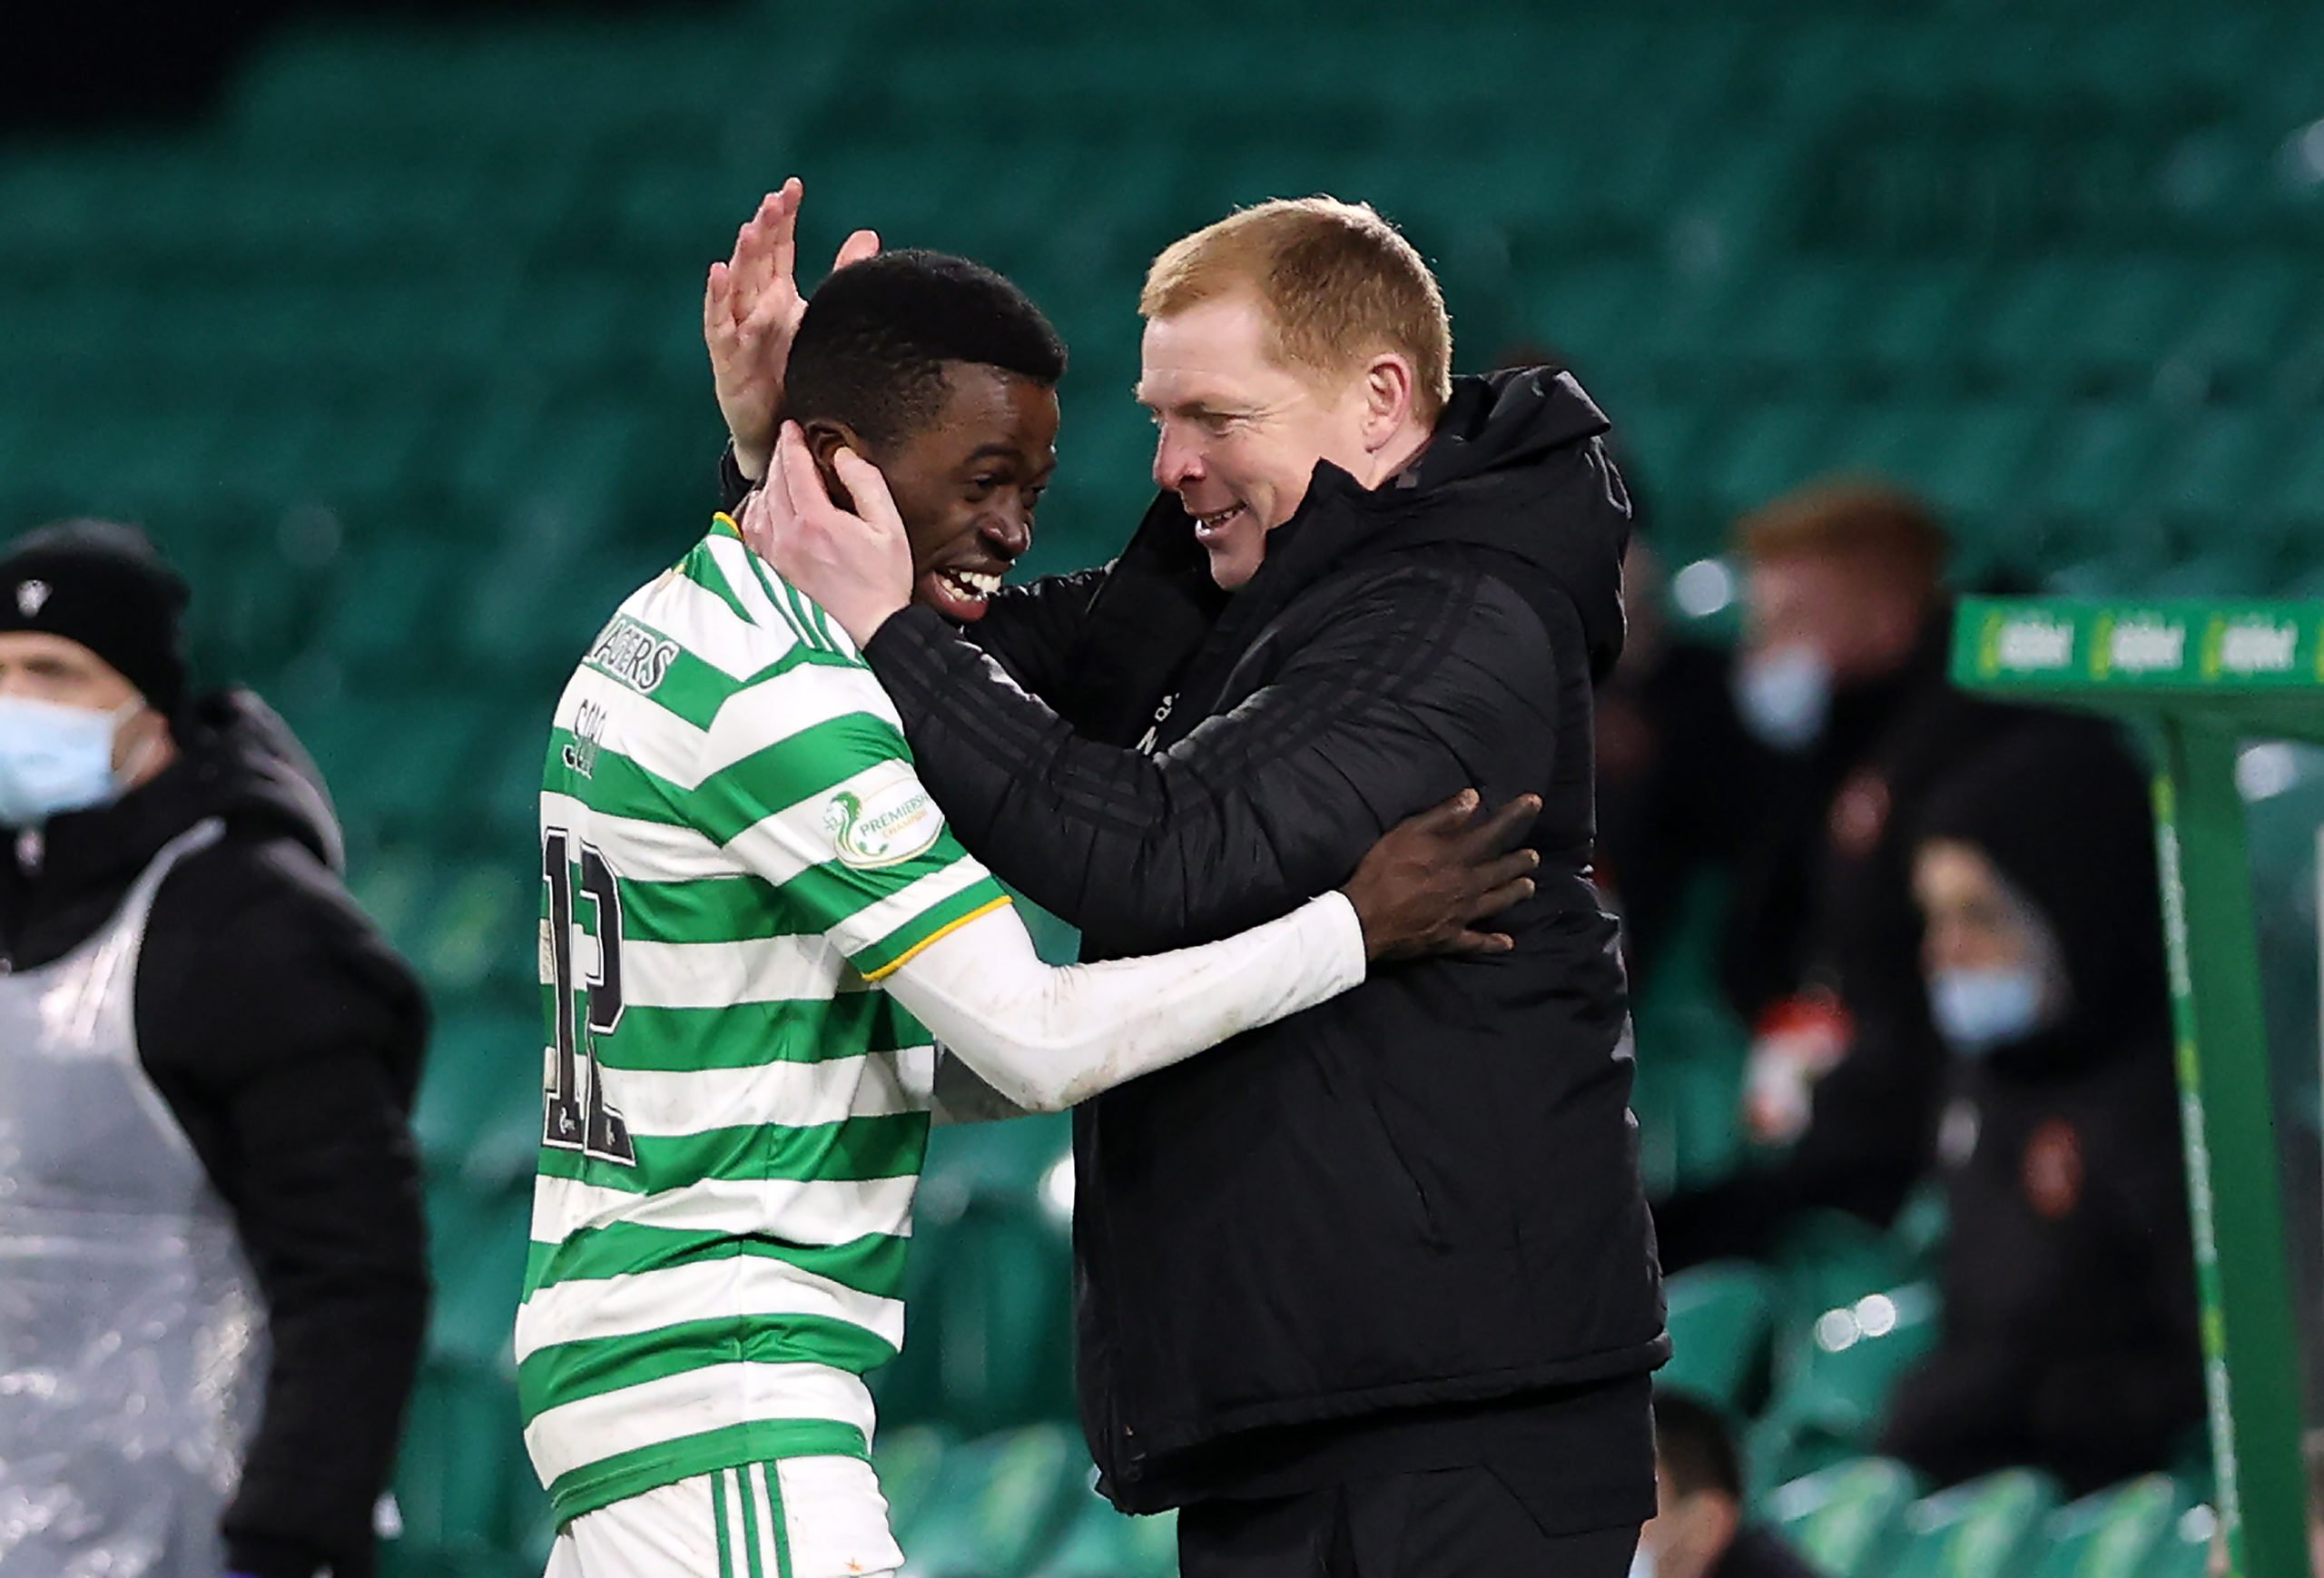 Ismaila Soro content proves popular as Celtic Twitter account tries to recover